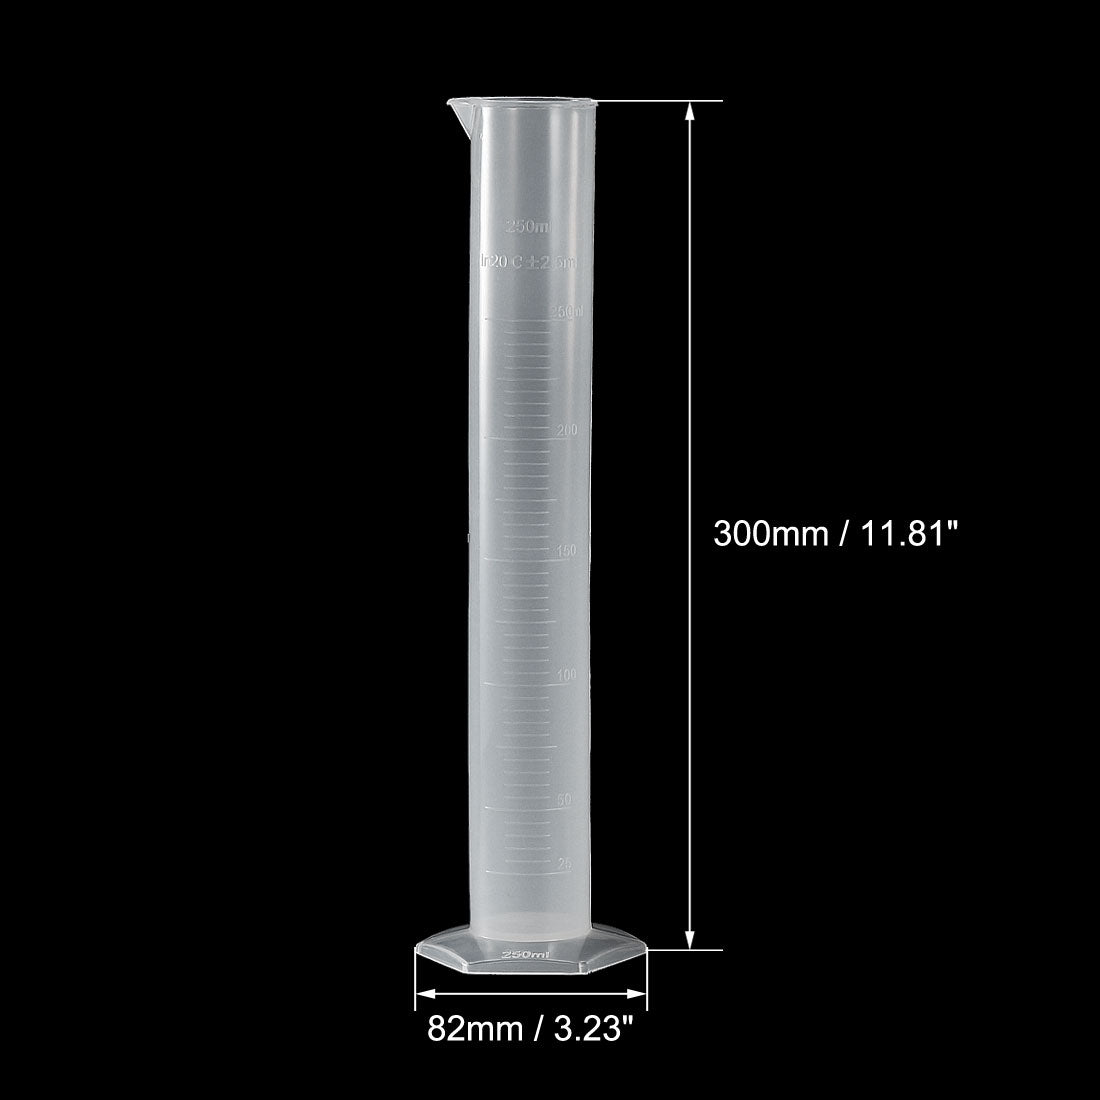 uxcell Uxcell 250ml Graduated Cylinder Laboratory Measurement Clear White Plastic Hex Base for Chemical Measuring